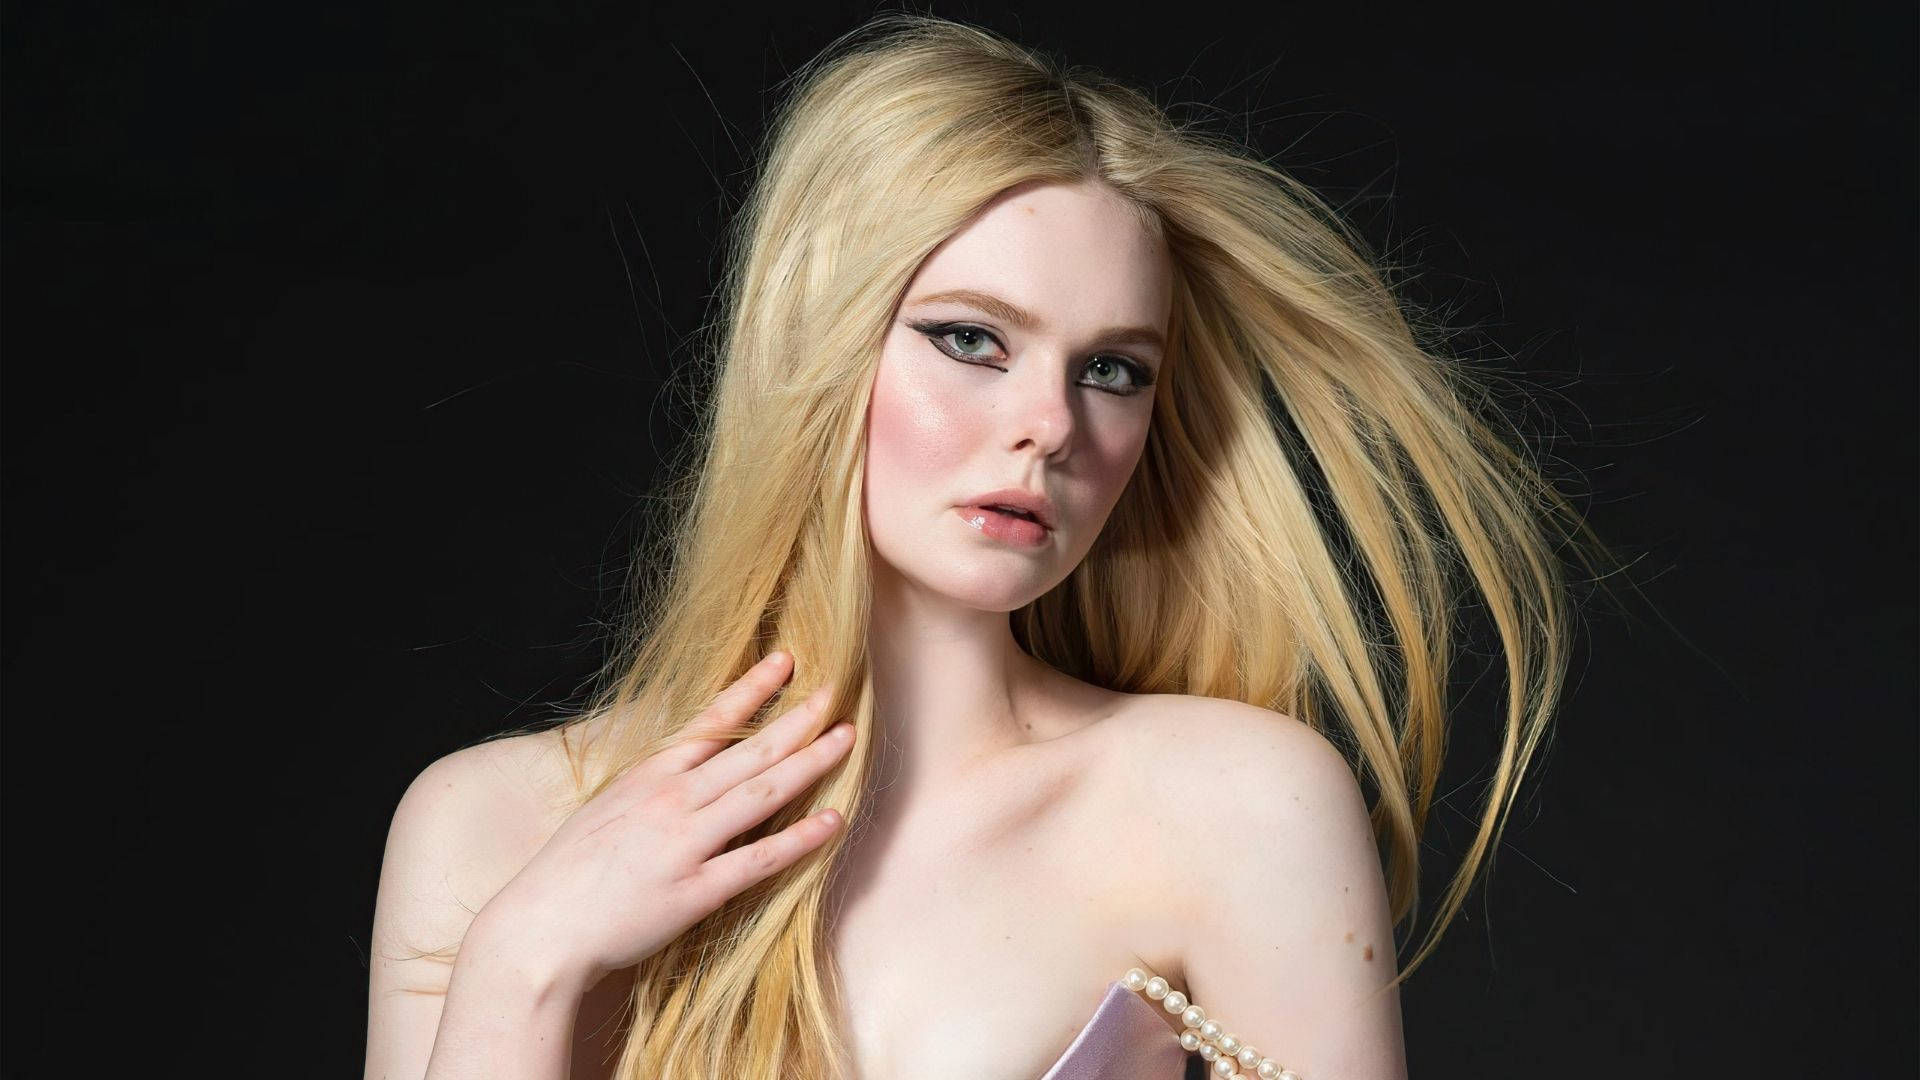 Elle Fanning Displays An Intense And Fierce Look In A Stunning Setting. Background